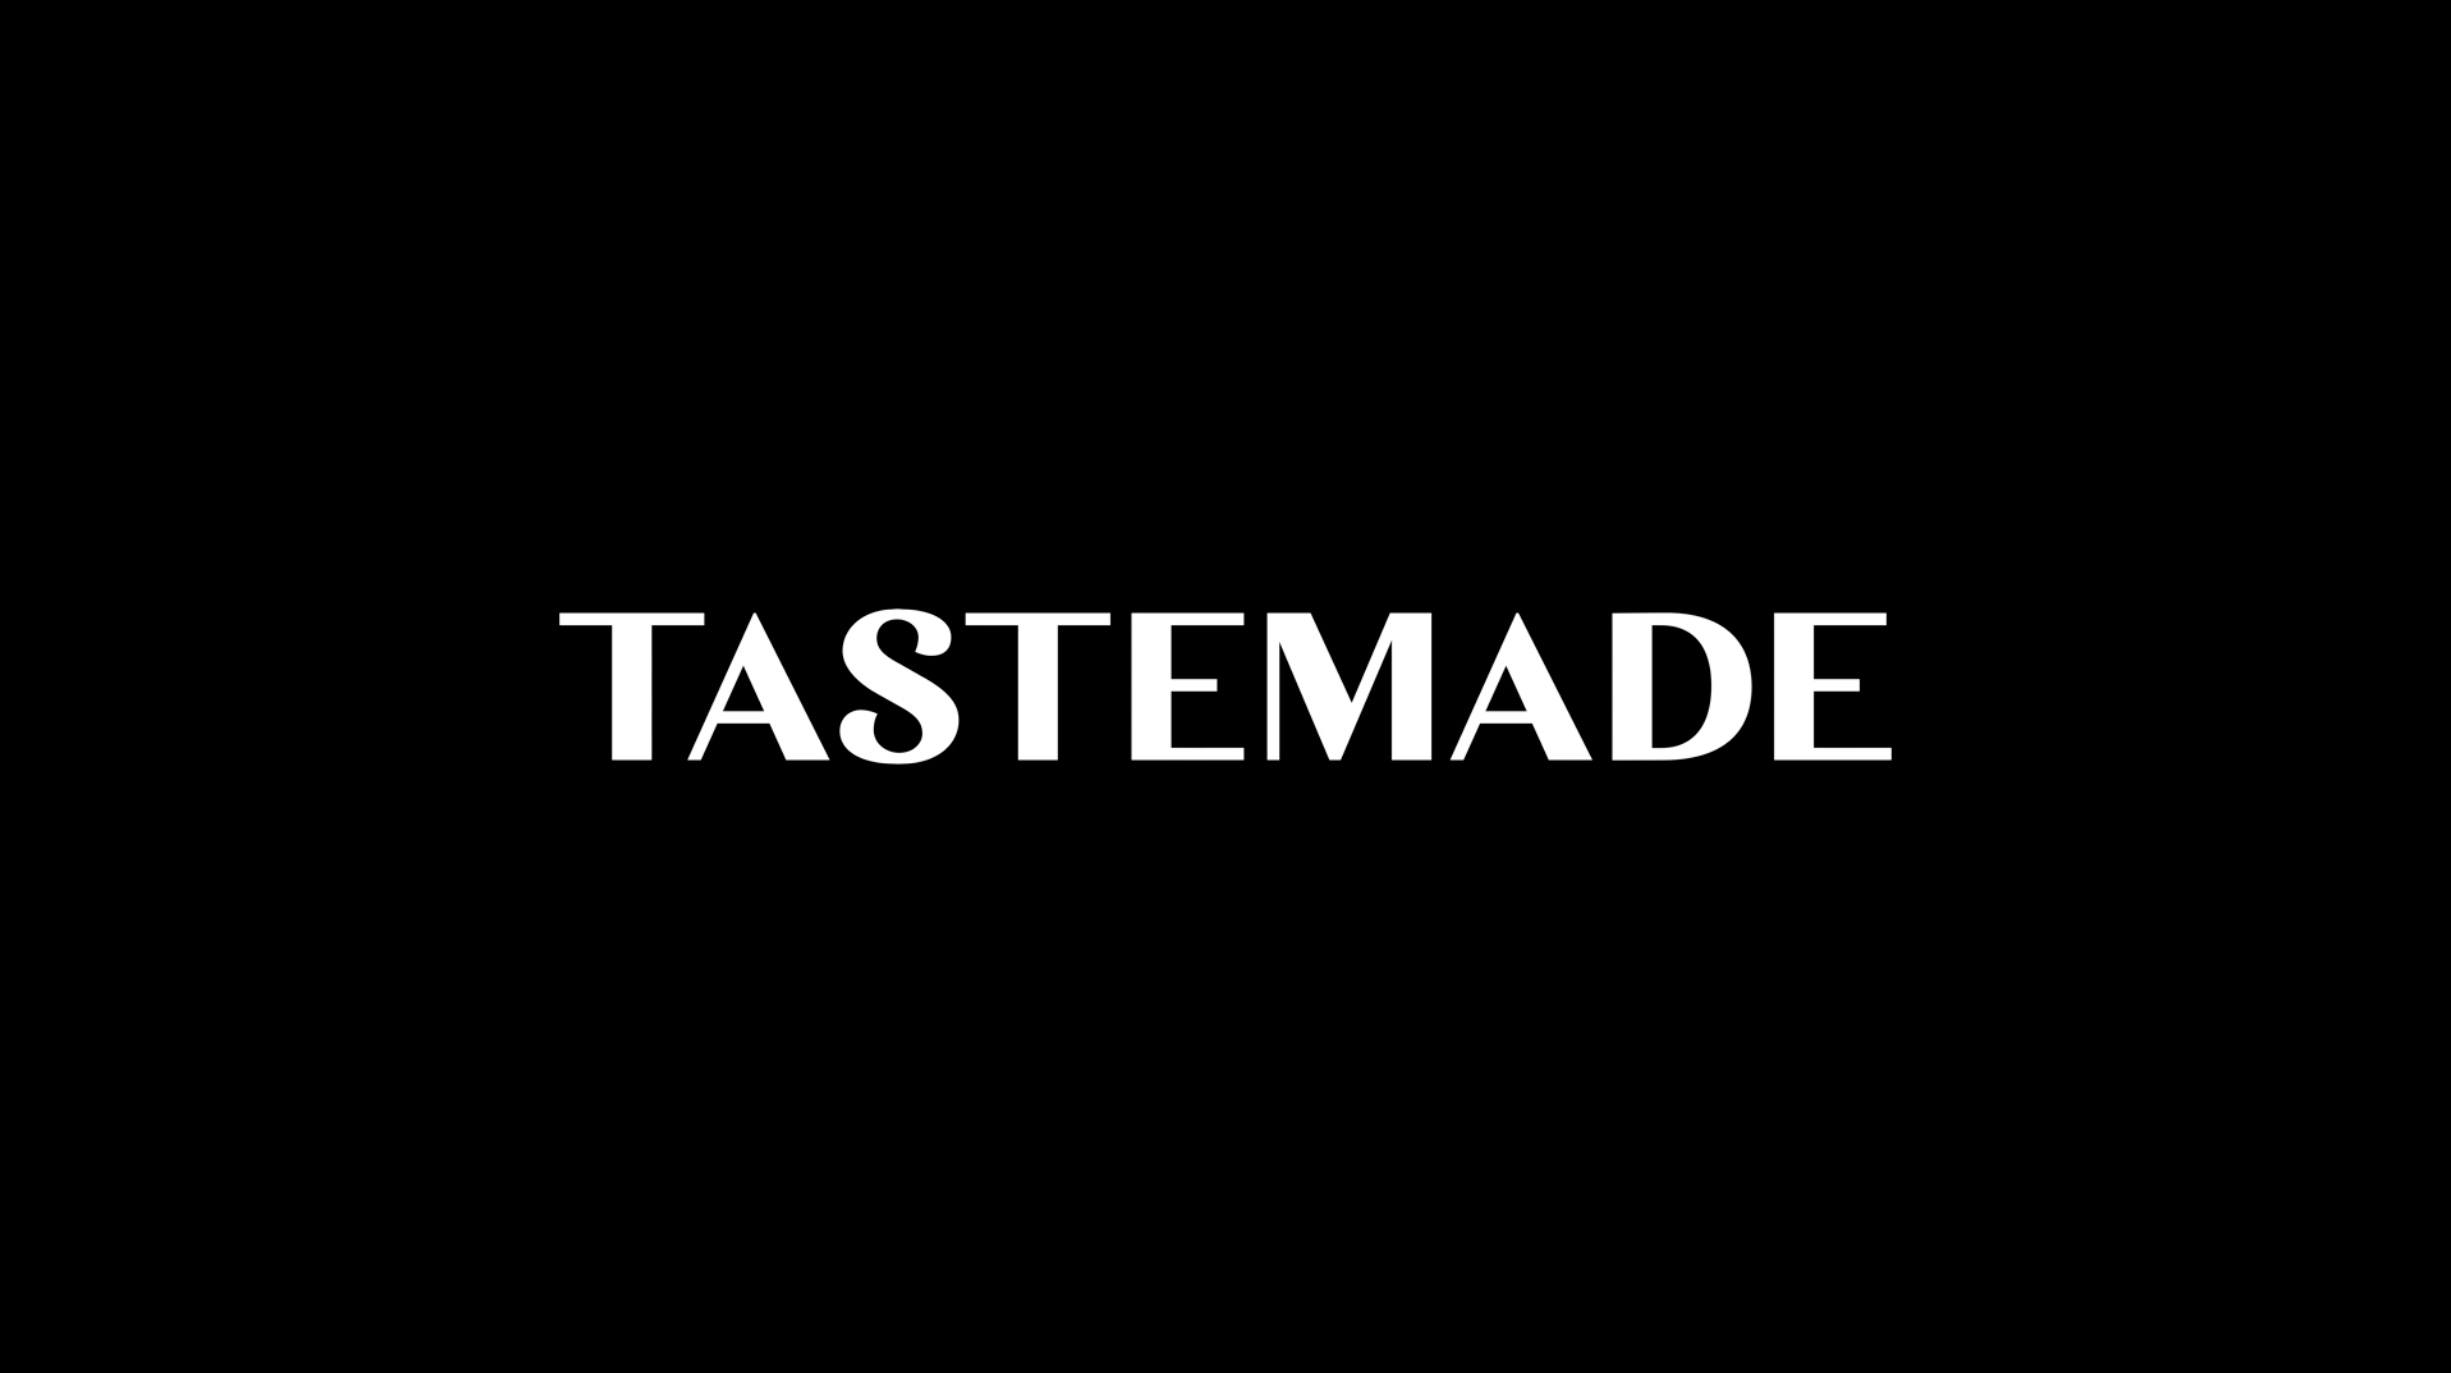 Tastemade is Now Streaming on Sling and Vizio SmartCast TVs